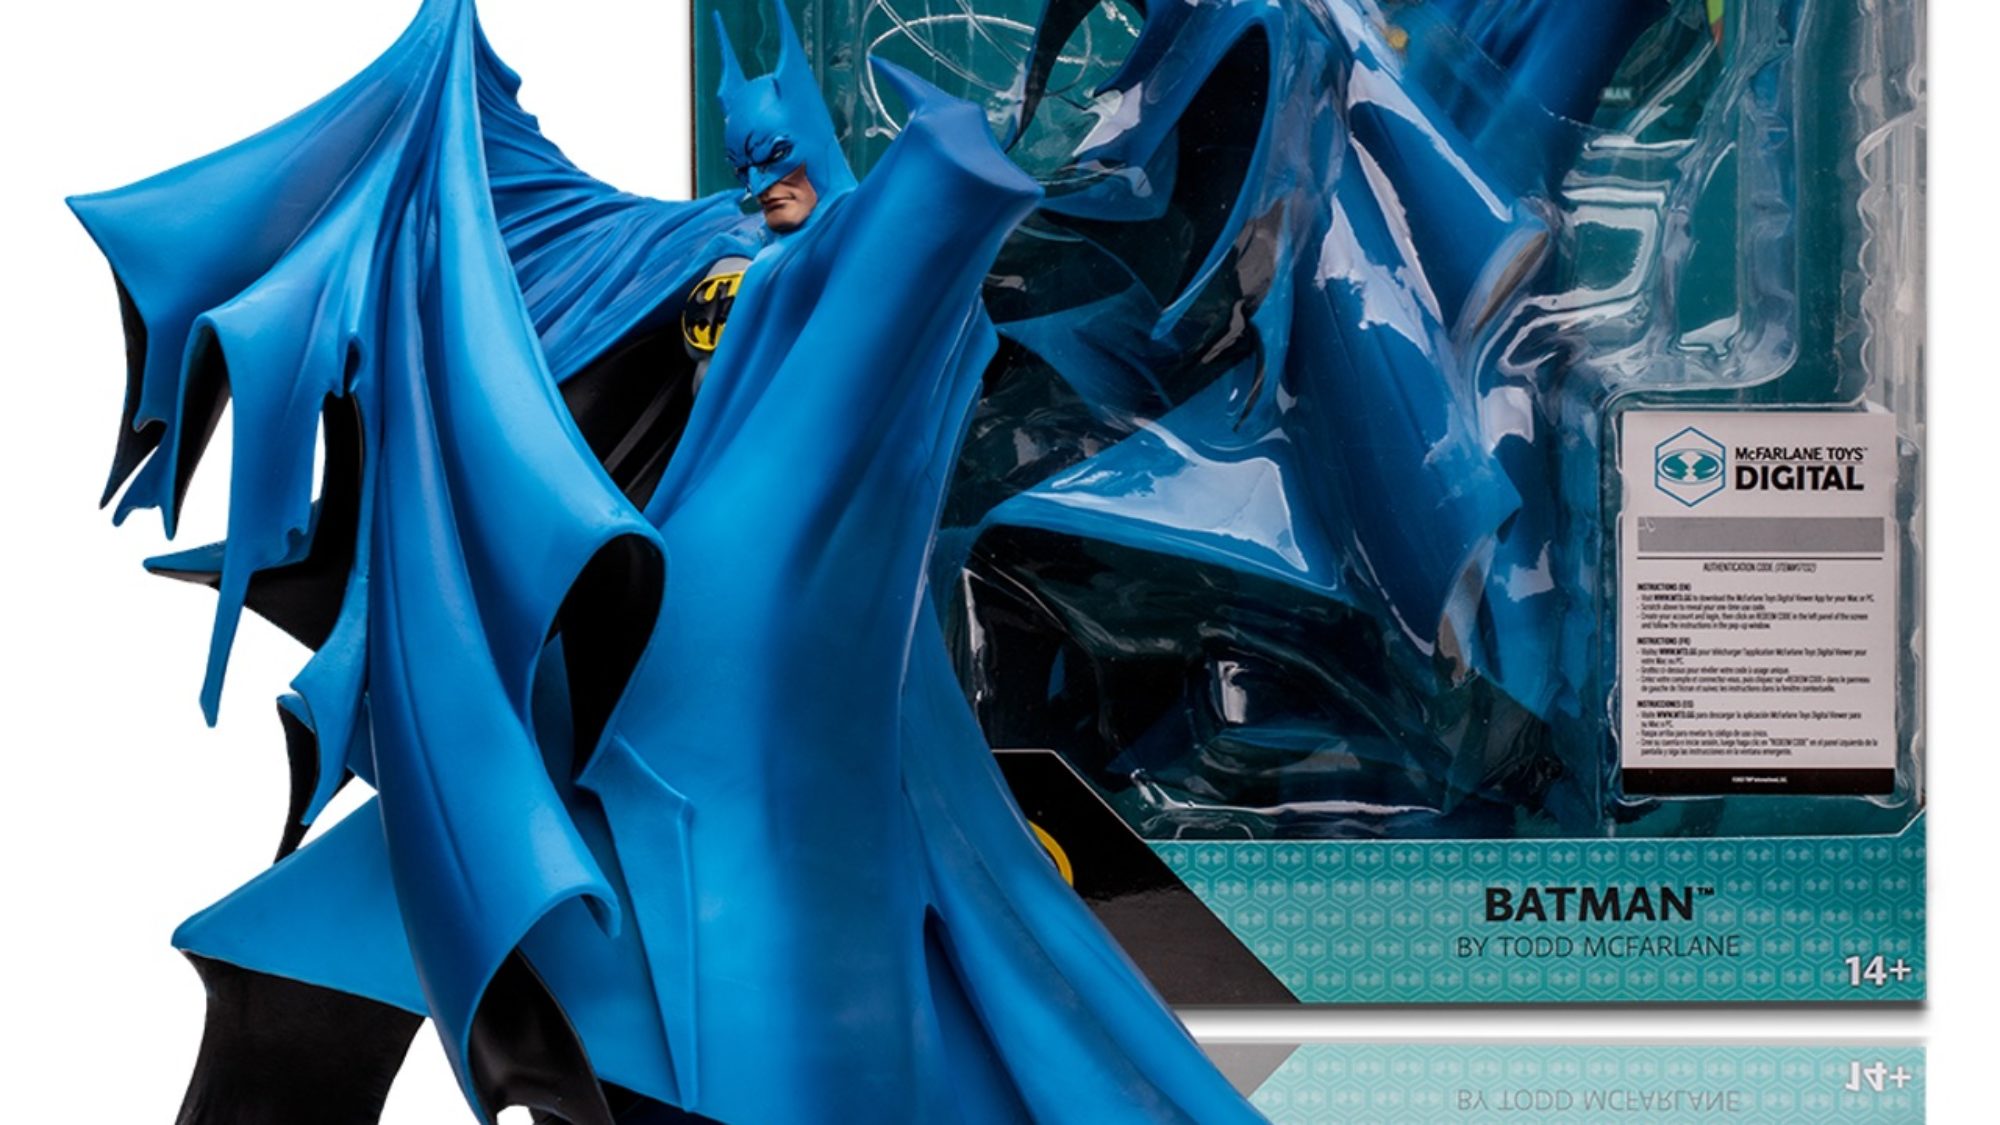 Batman Suits Up in Blue with McFarlane Toys Latest DC Comics Statue